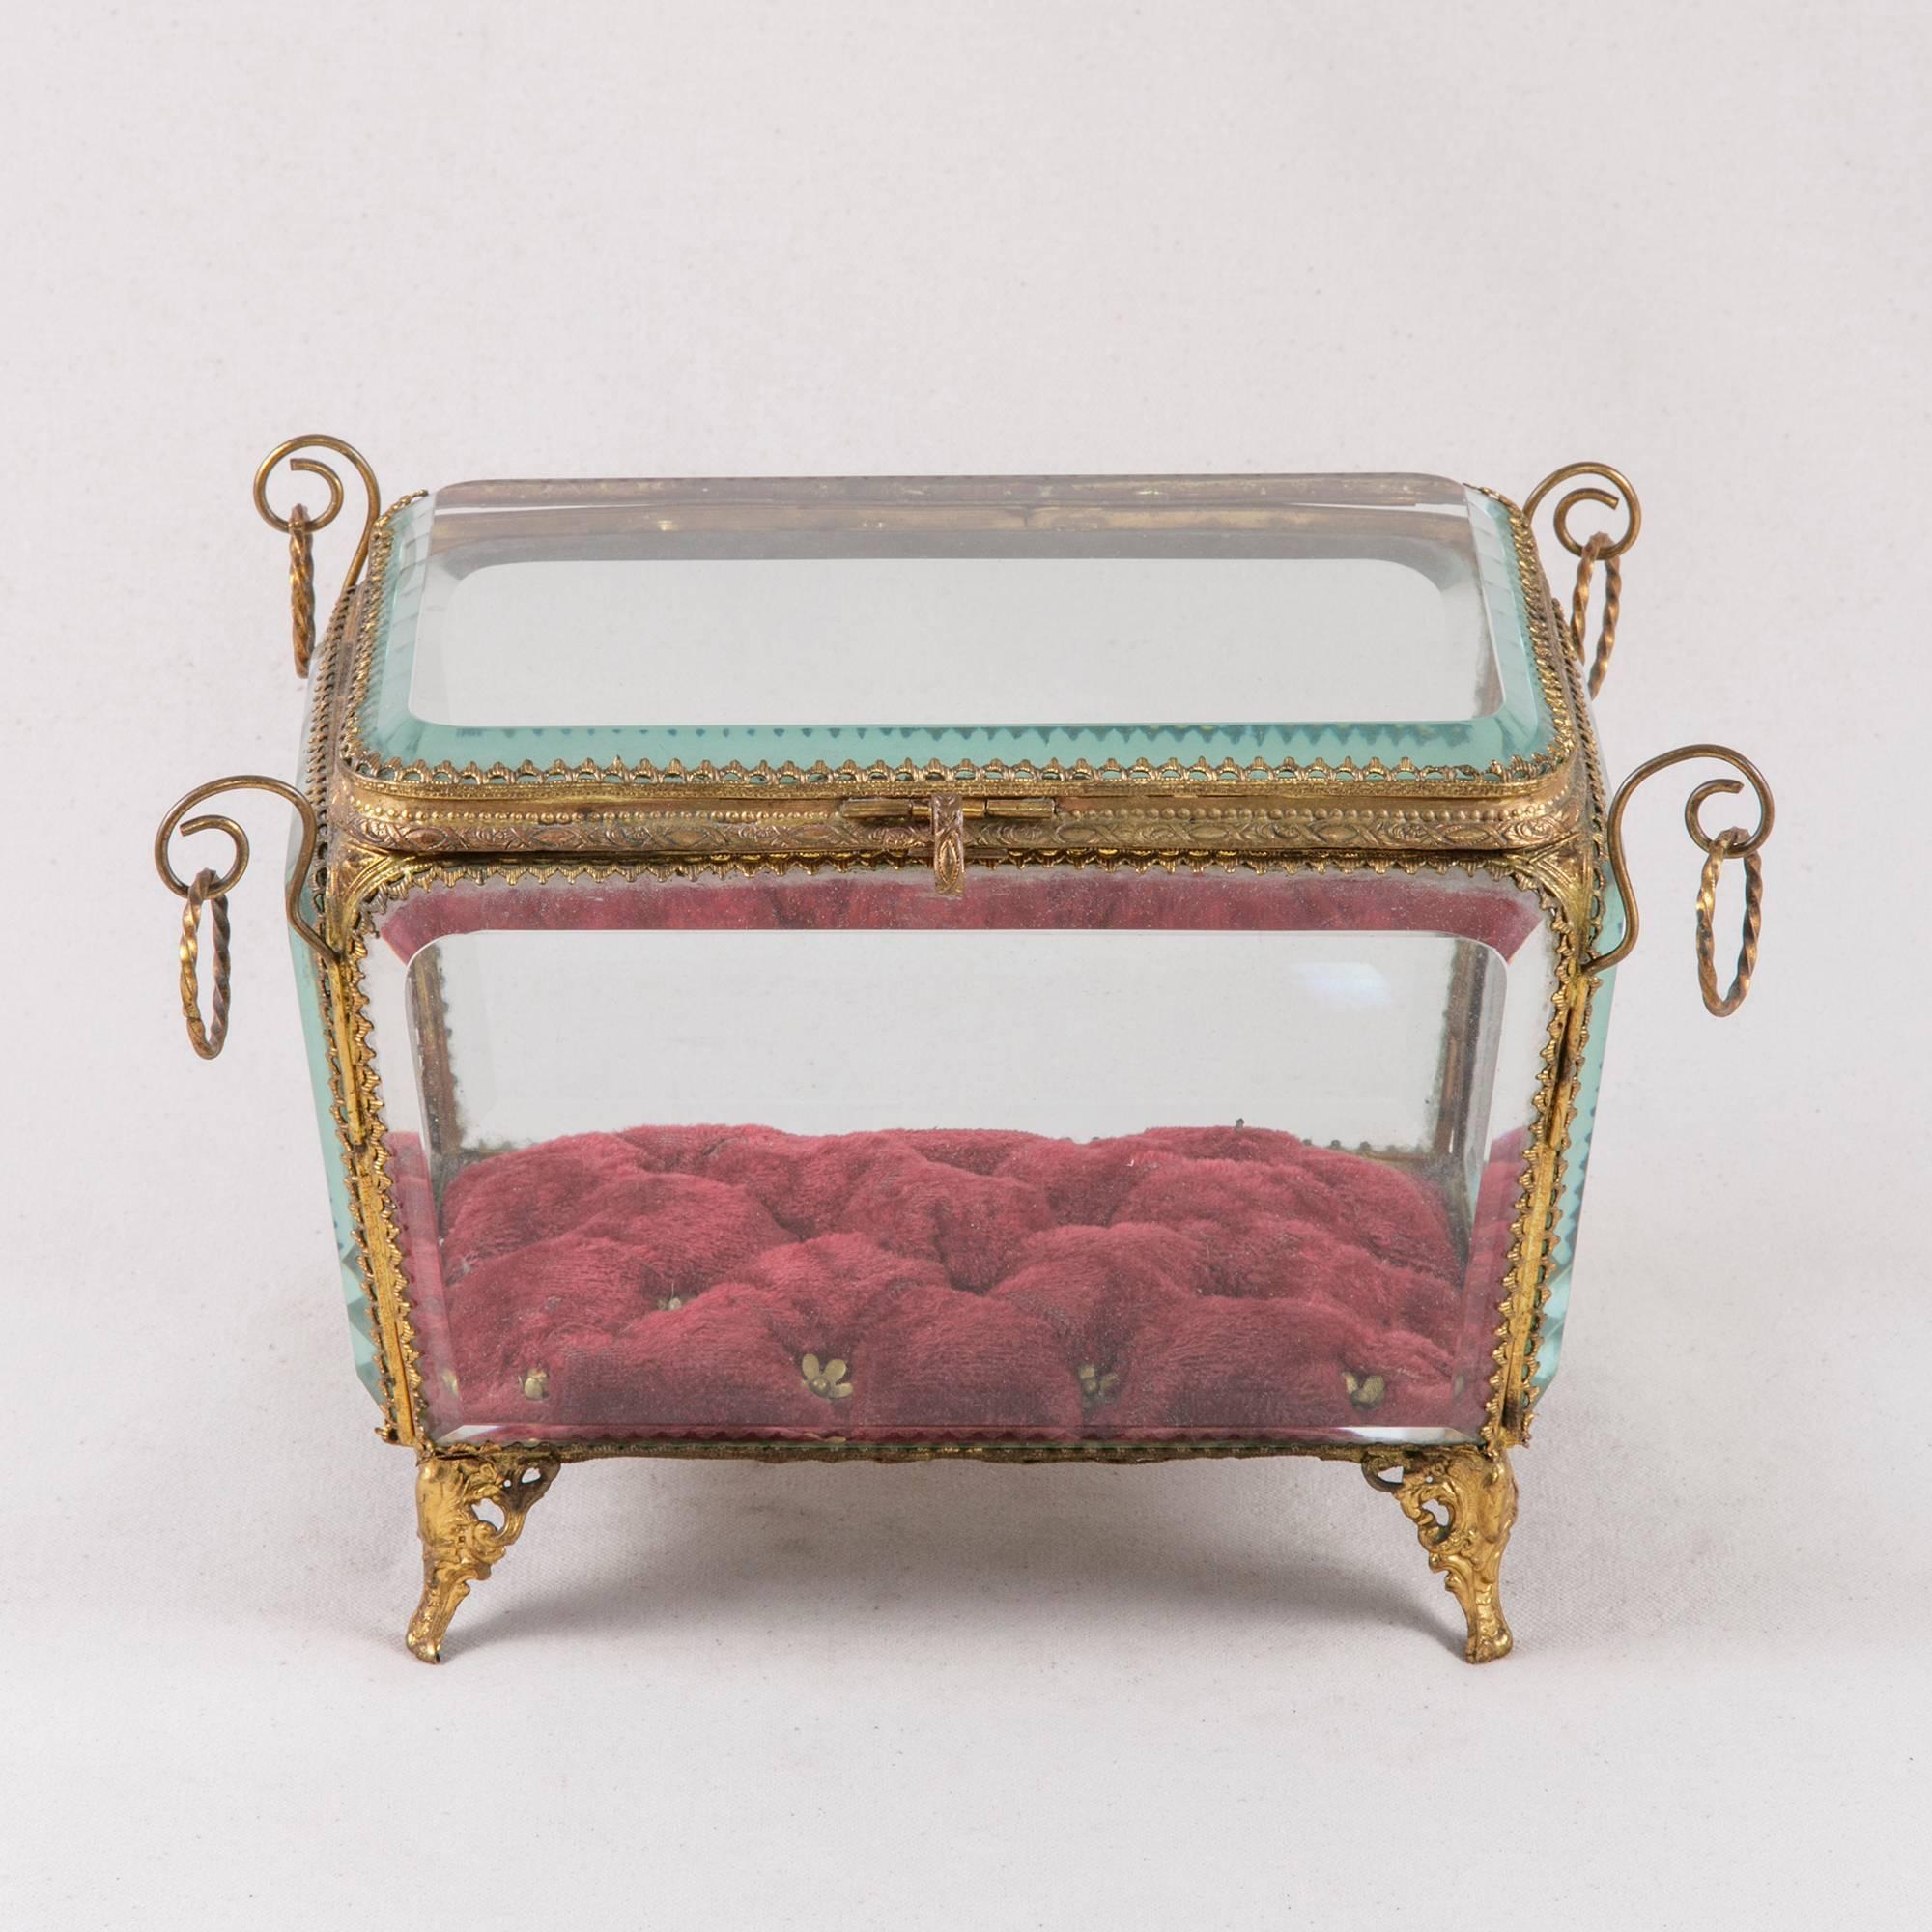 Your cherished keepsakes will find an elegant home in this French 19th century crystal jewelry box from the Napoleon III period. Featuring brass detailing and a red tufted velvet interior, the brass frame holds five beveled windows accented by